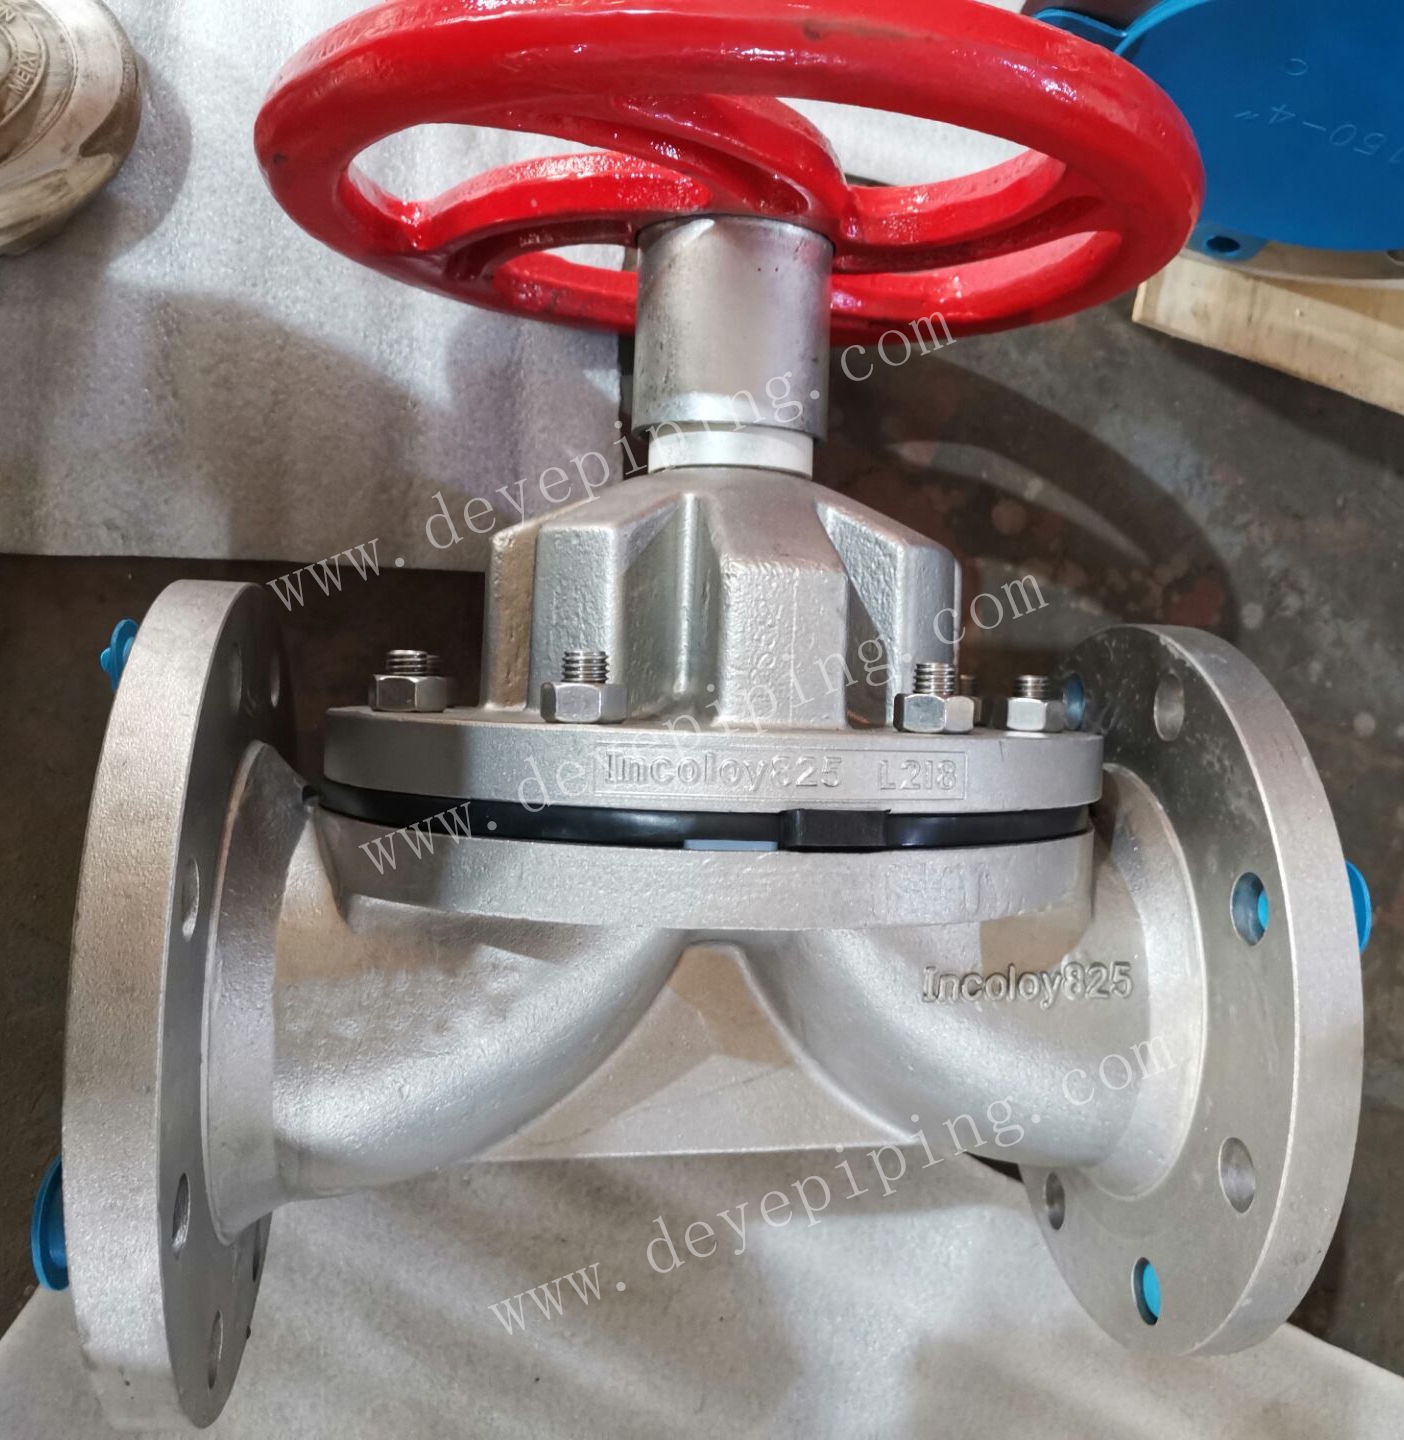 Diaphragm Valves of Incoloy825